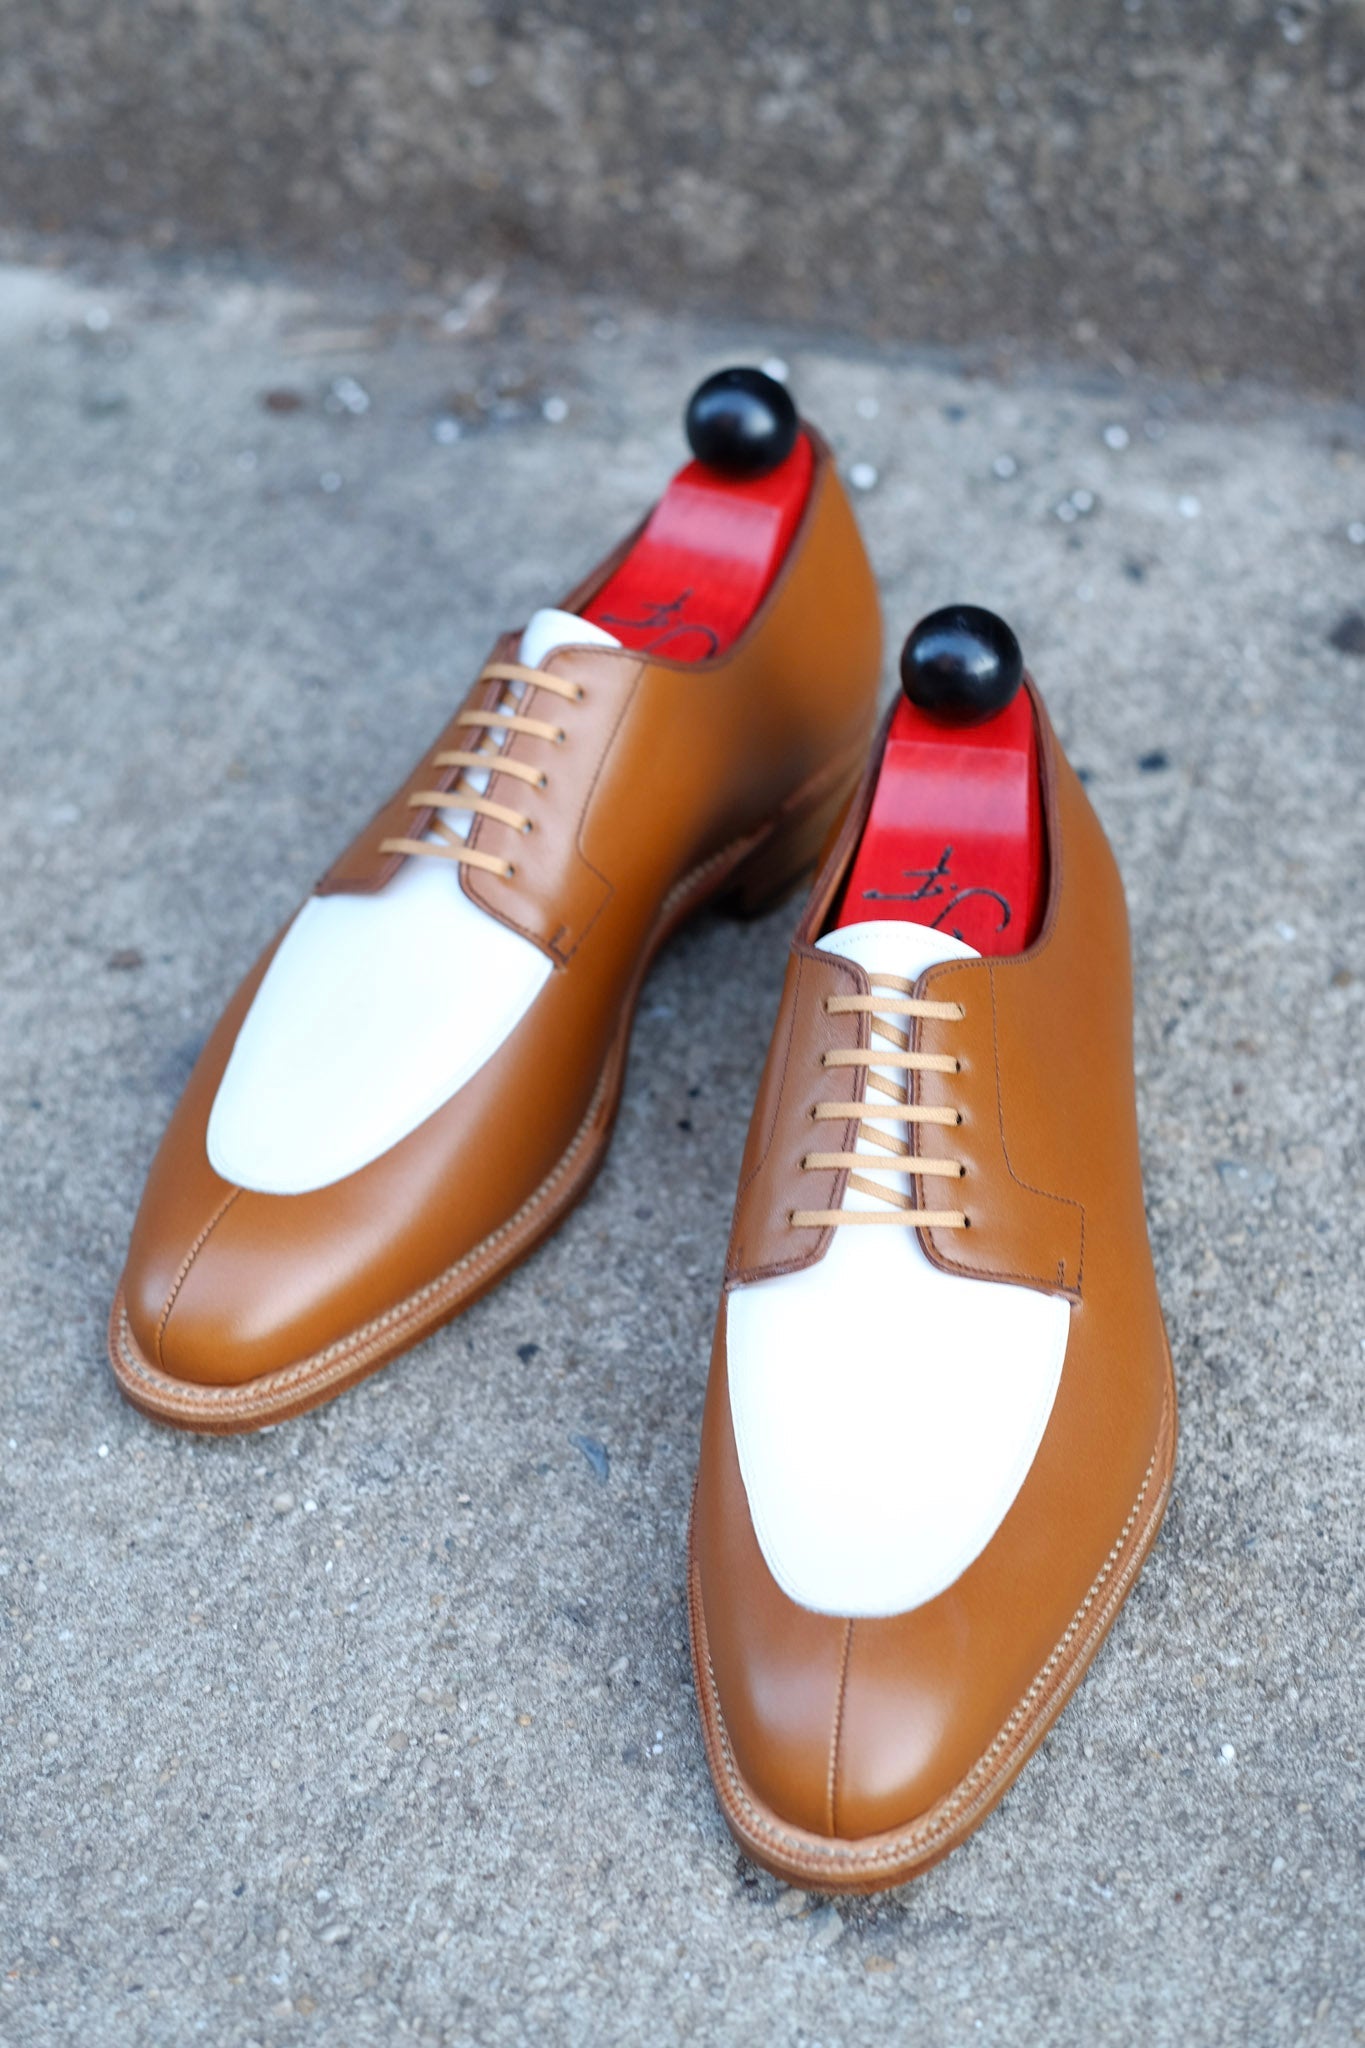 Belltown MTO - Maple Calf / White Calf - NGT Last- Single Leather Sole